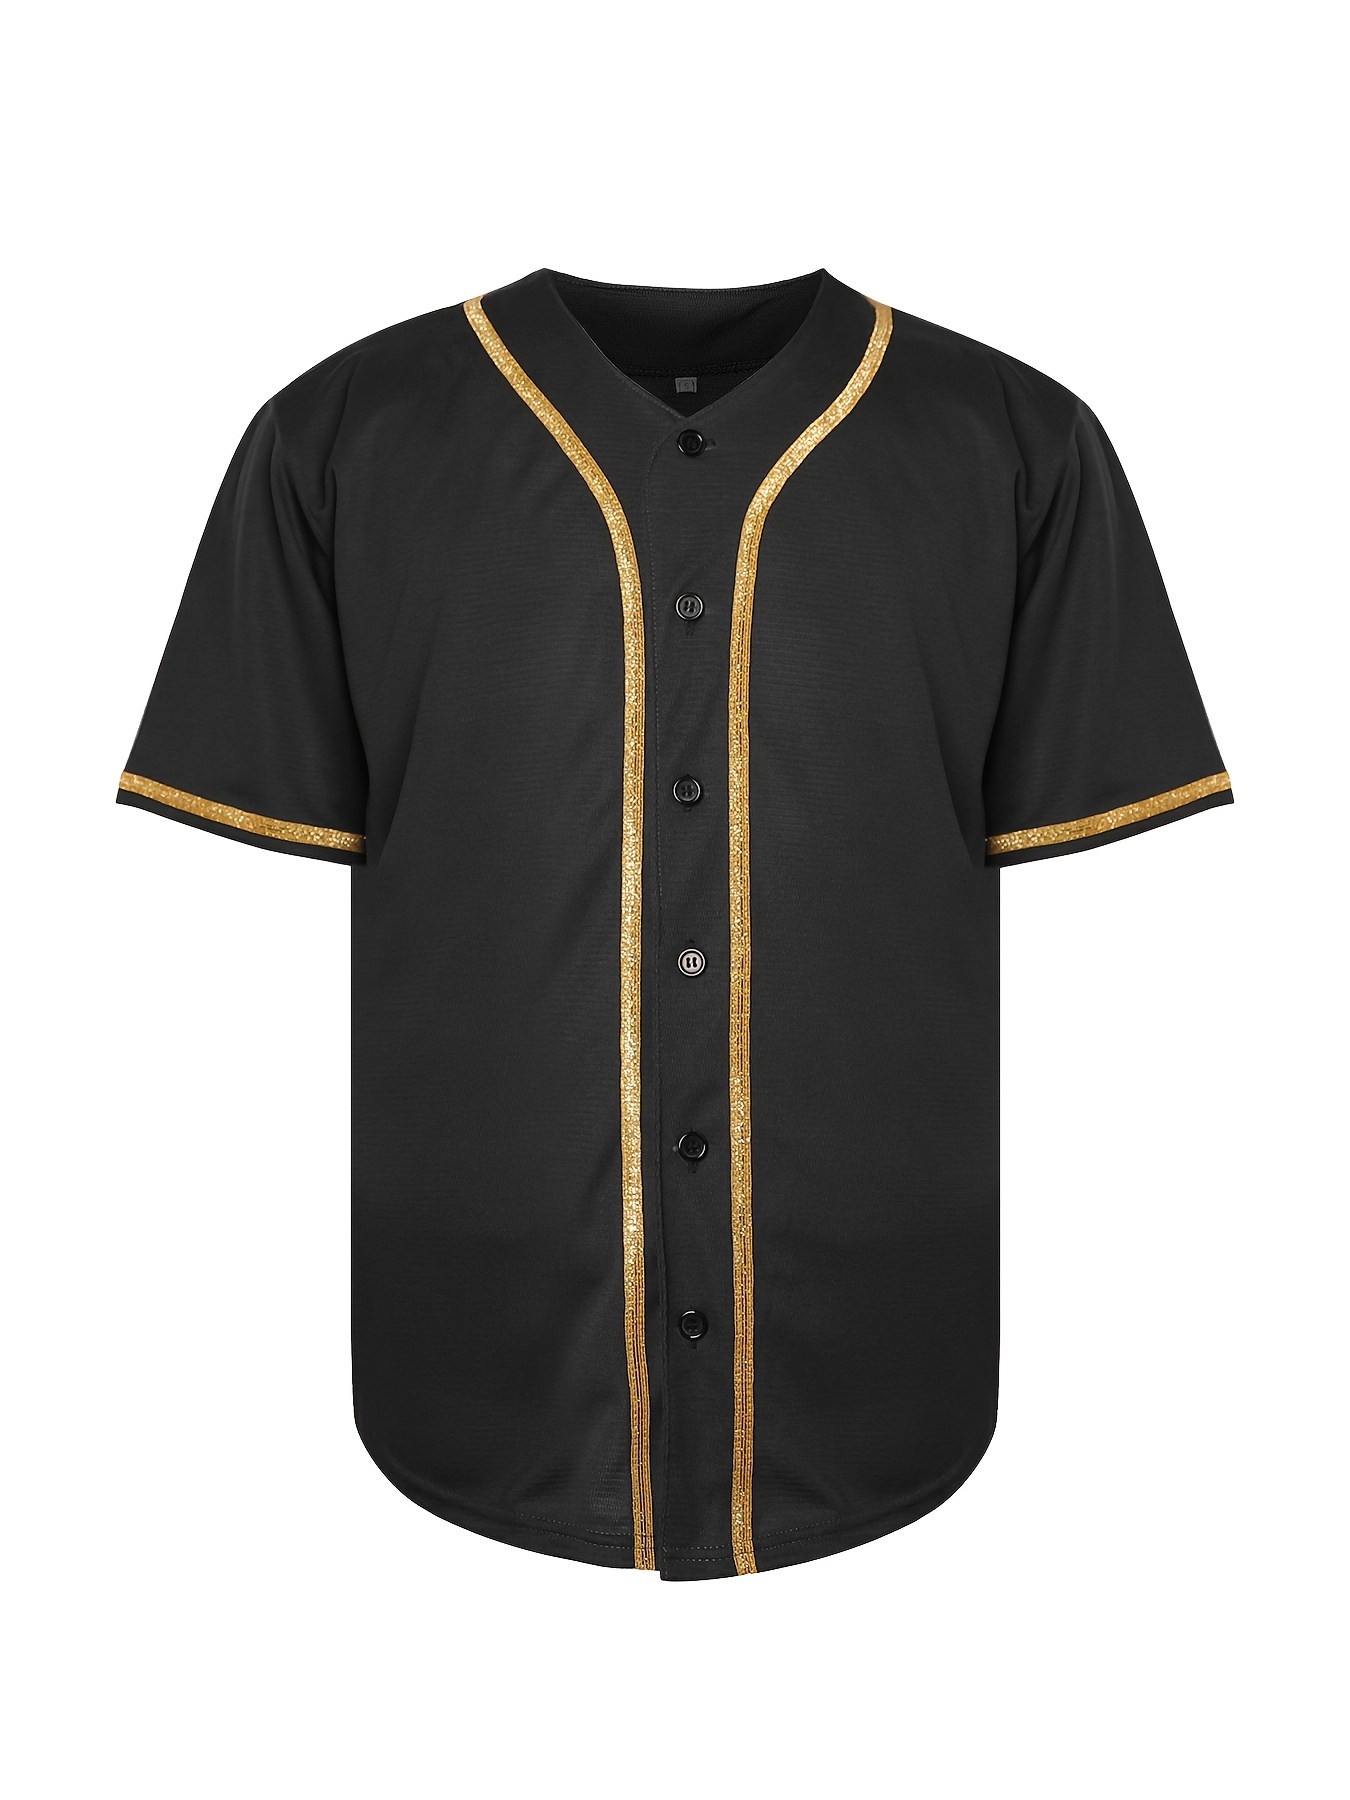 Men's Baseball Jersey, Retro Classic Baseball Shirt, Breathable Embroidery Sports Uniform for Training Competition Party,Temu